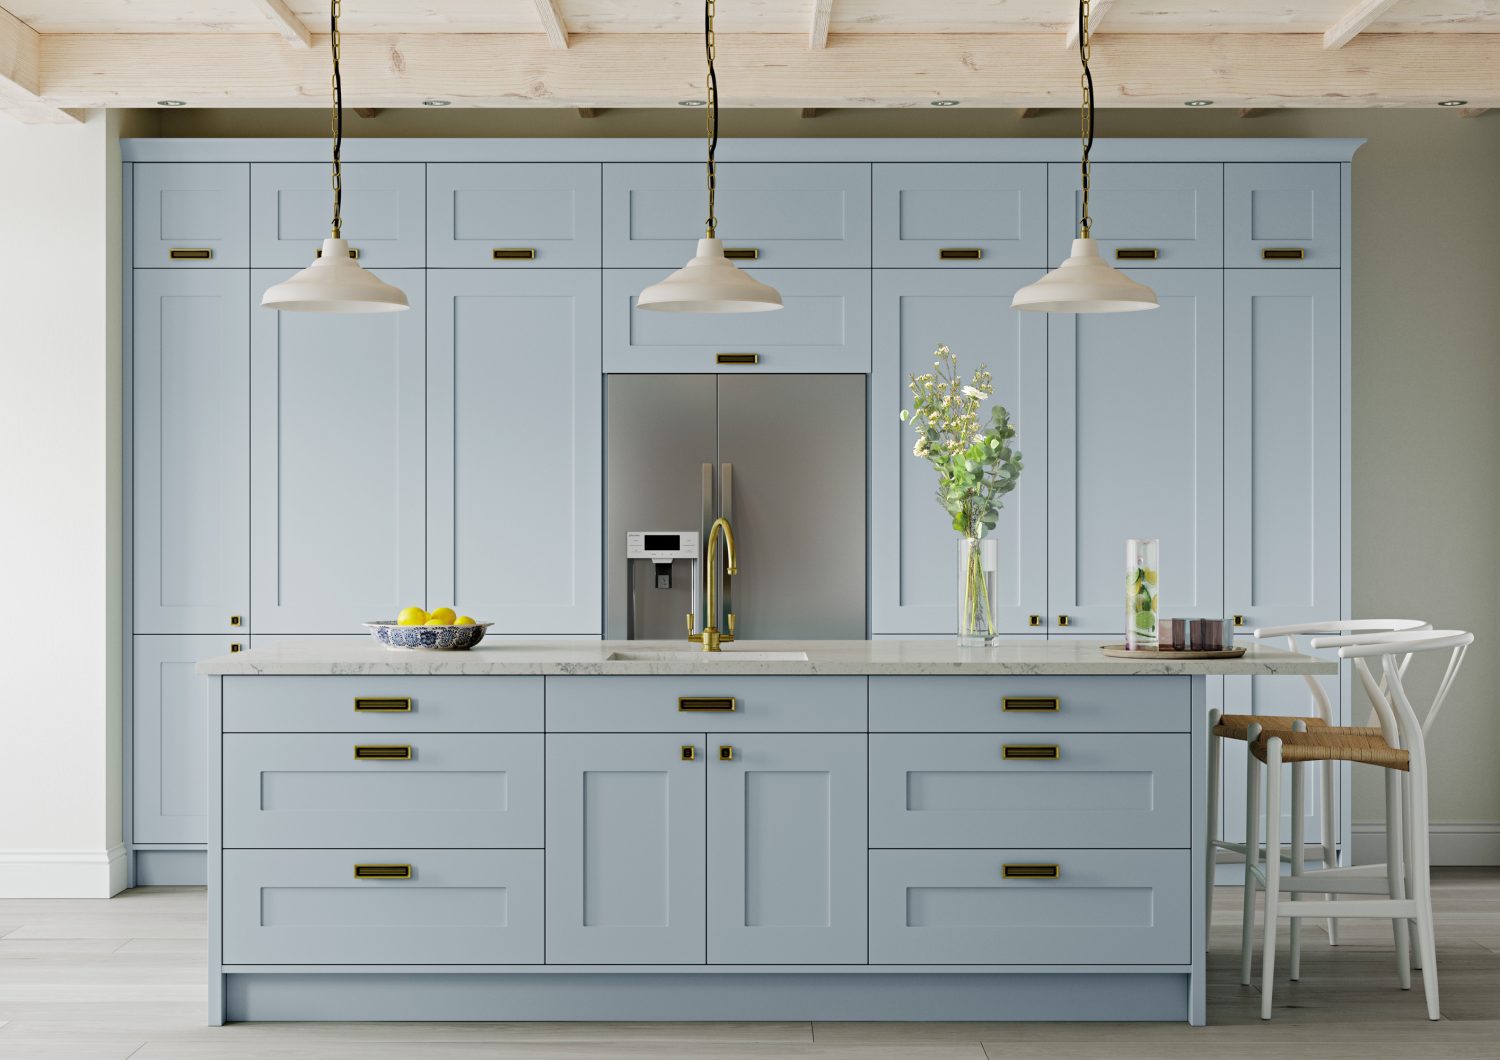 This Pantry Blue Shaker kitchen design is light and airy, the pastel Pantry Blue doors create a modern feel that is unique. The full kitchen has pantry blue doors, a kitchen island and a silver American fridge freezer. All doors have gold handles and was designed by The Kitchen Depot.